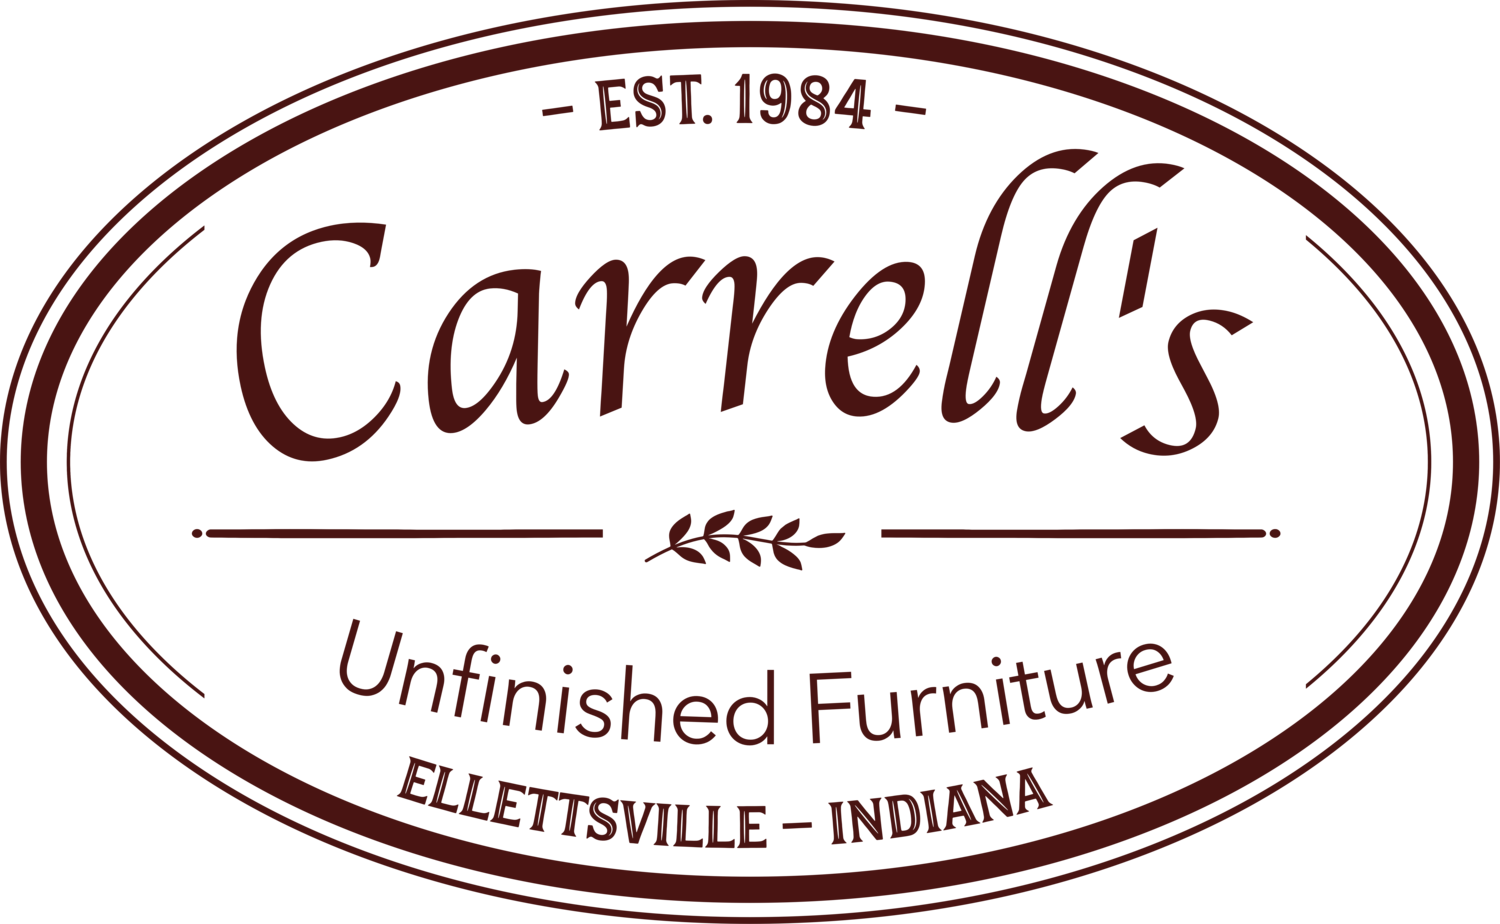 Carrell S Unfinished Furniture Carrell S Unfinished Furniture